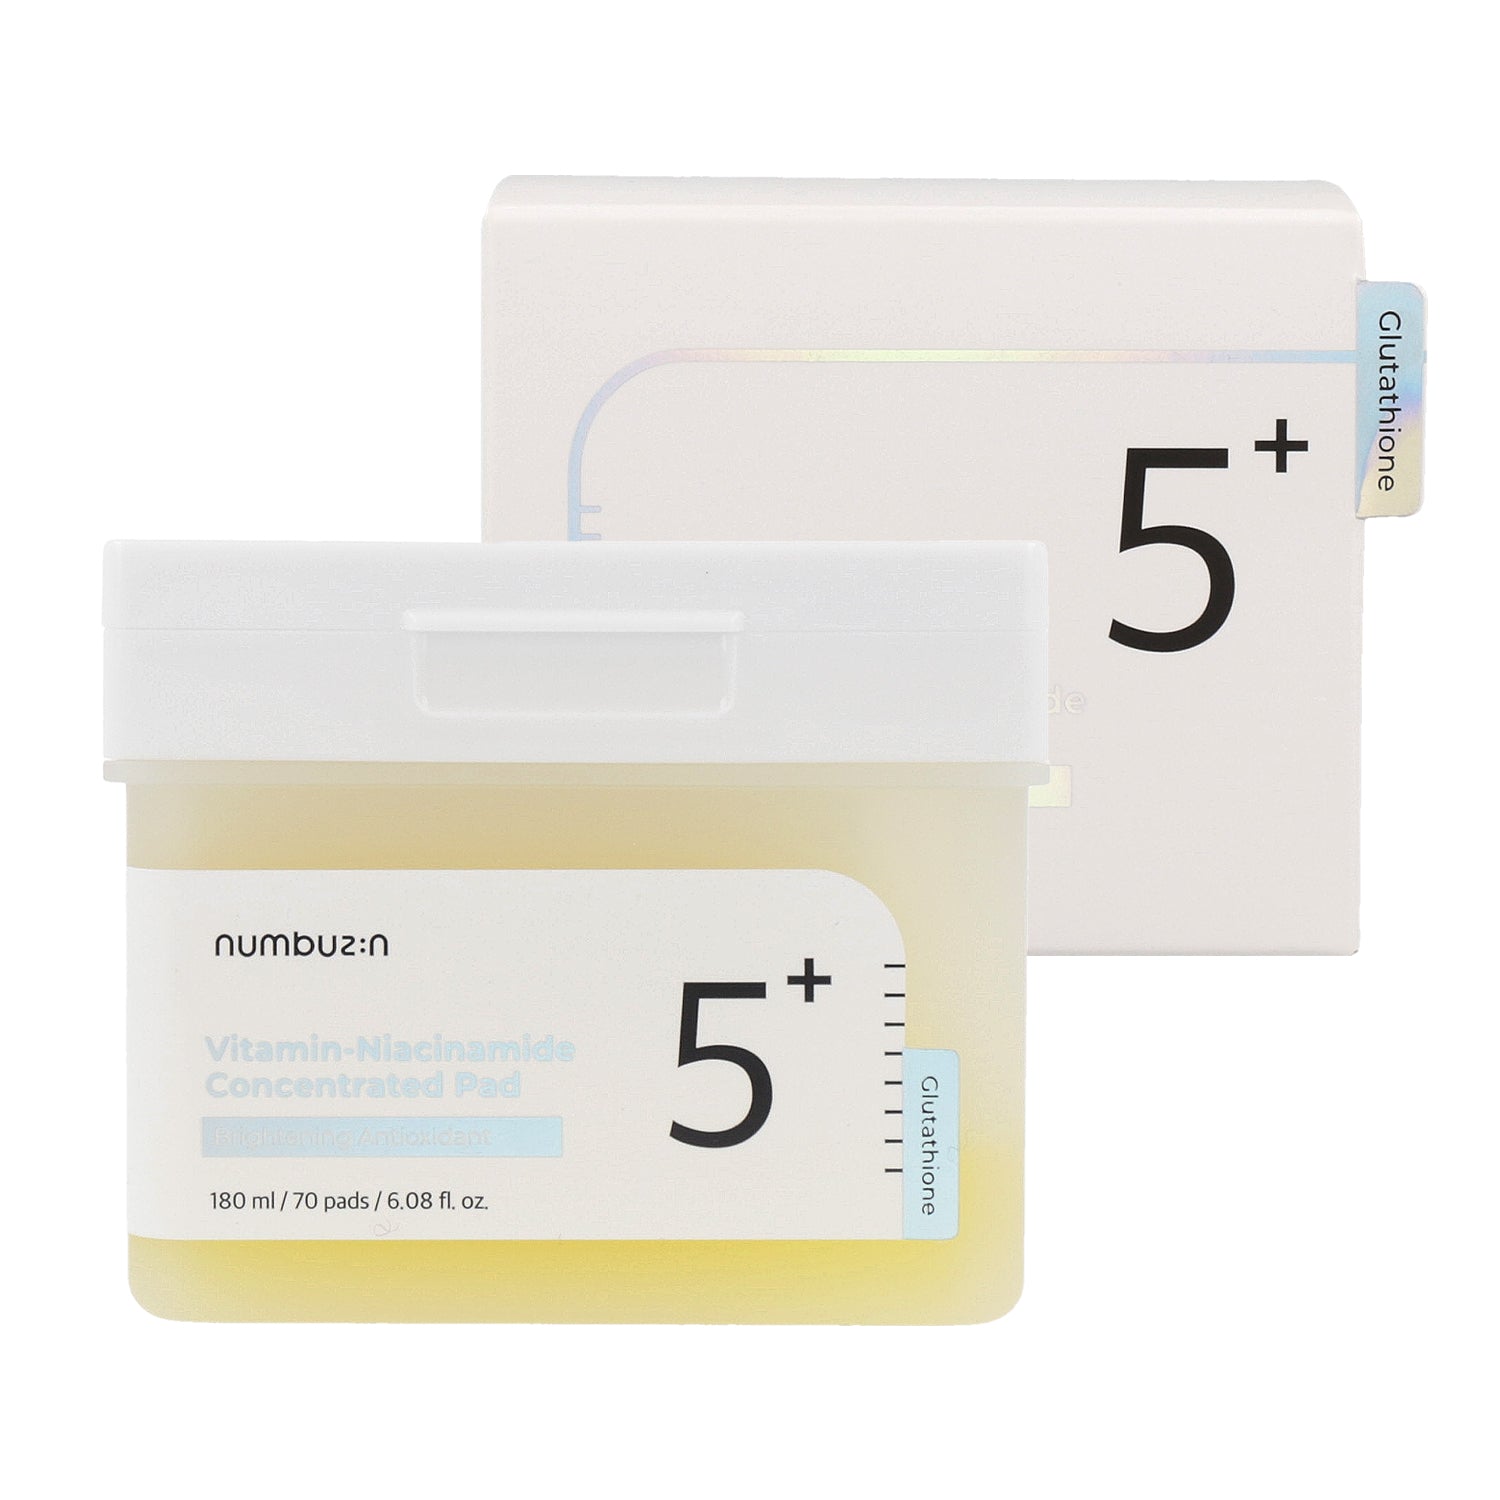 numbuzin No.5 Vitamin-Niacinamide Concentrated Pad 180ml (70 Pads) - DODOSKIN